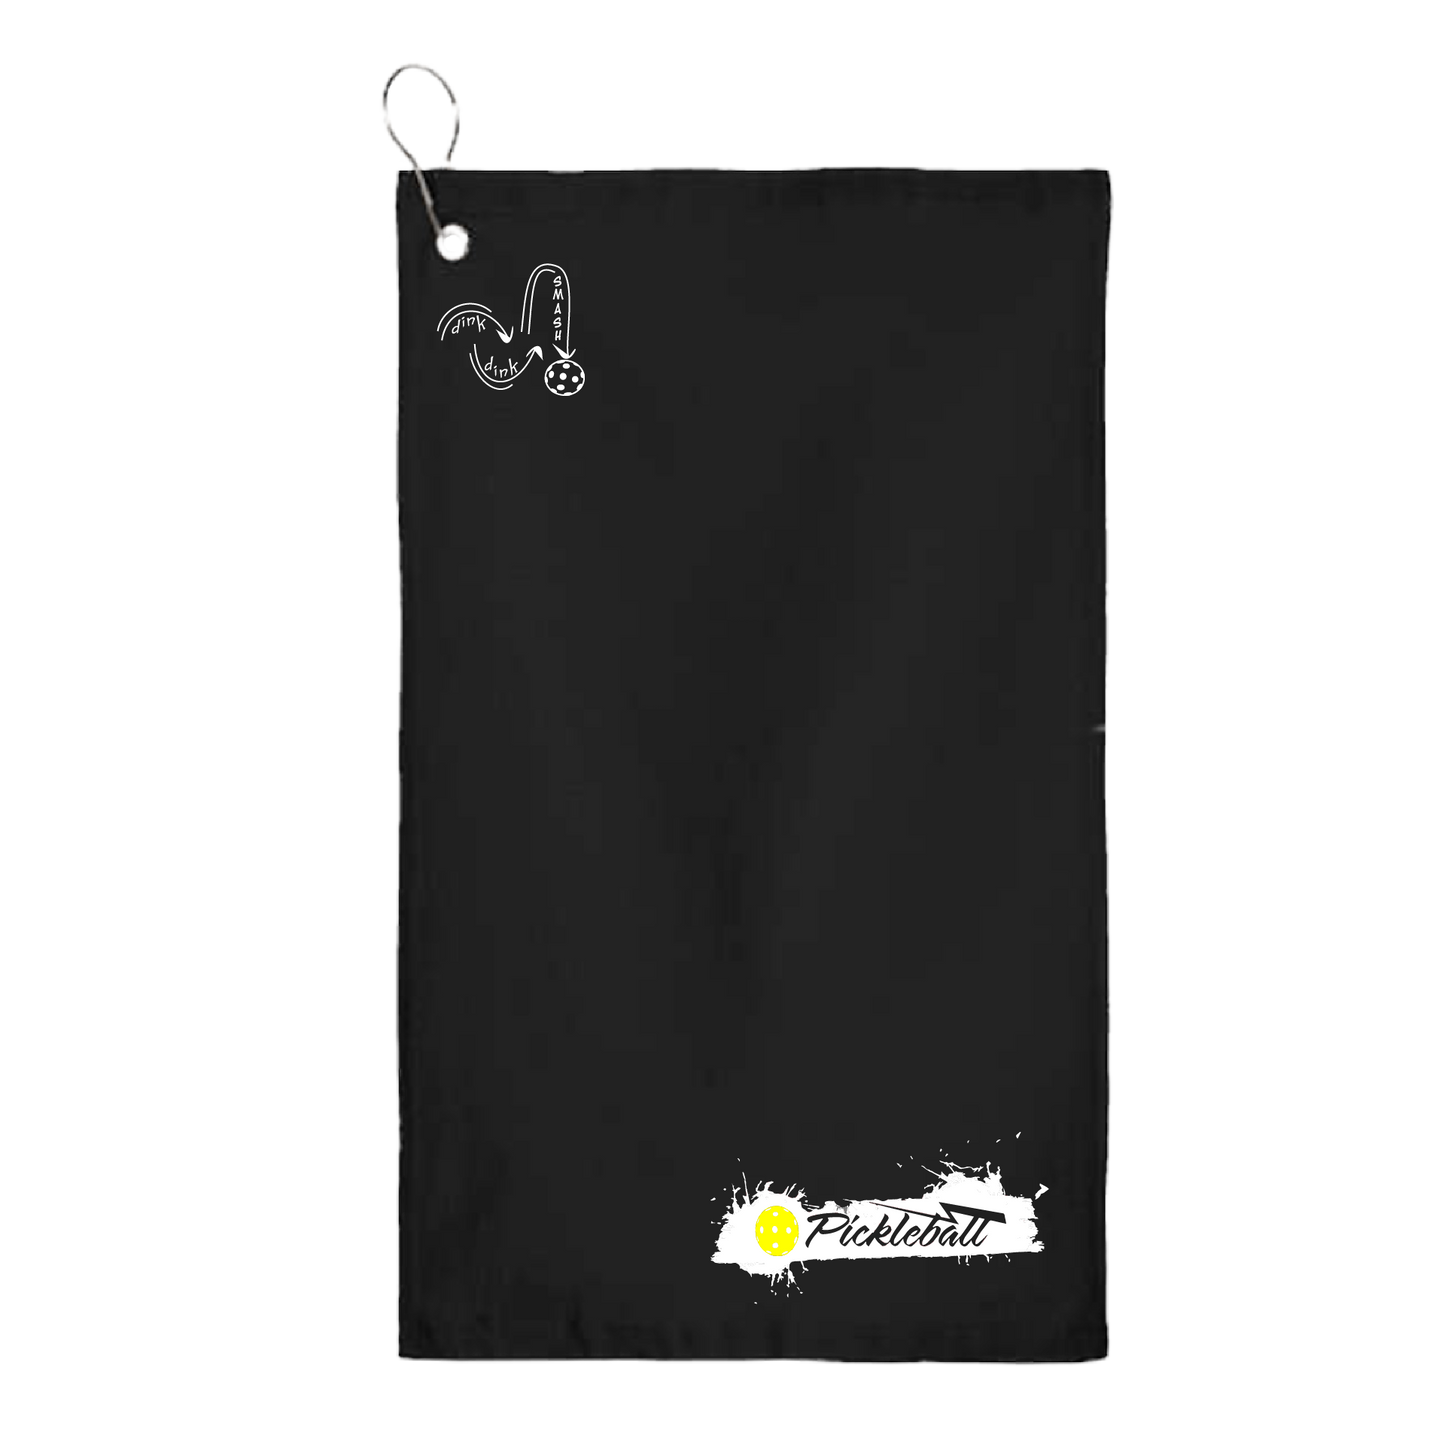 This pickleball towel is crafted with cotton terry velour for optimal performance. It features grommets, hooks, and hemmed edges for added durability. It's perfect for completing your pickleball gear, and an ideal gift for friends and tournaments. The towel is designed to be both absorbent and lightweight, so you can remain dry and comfortable while you play.